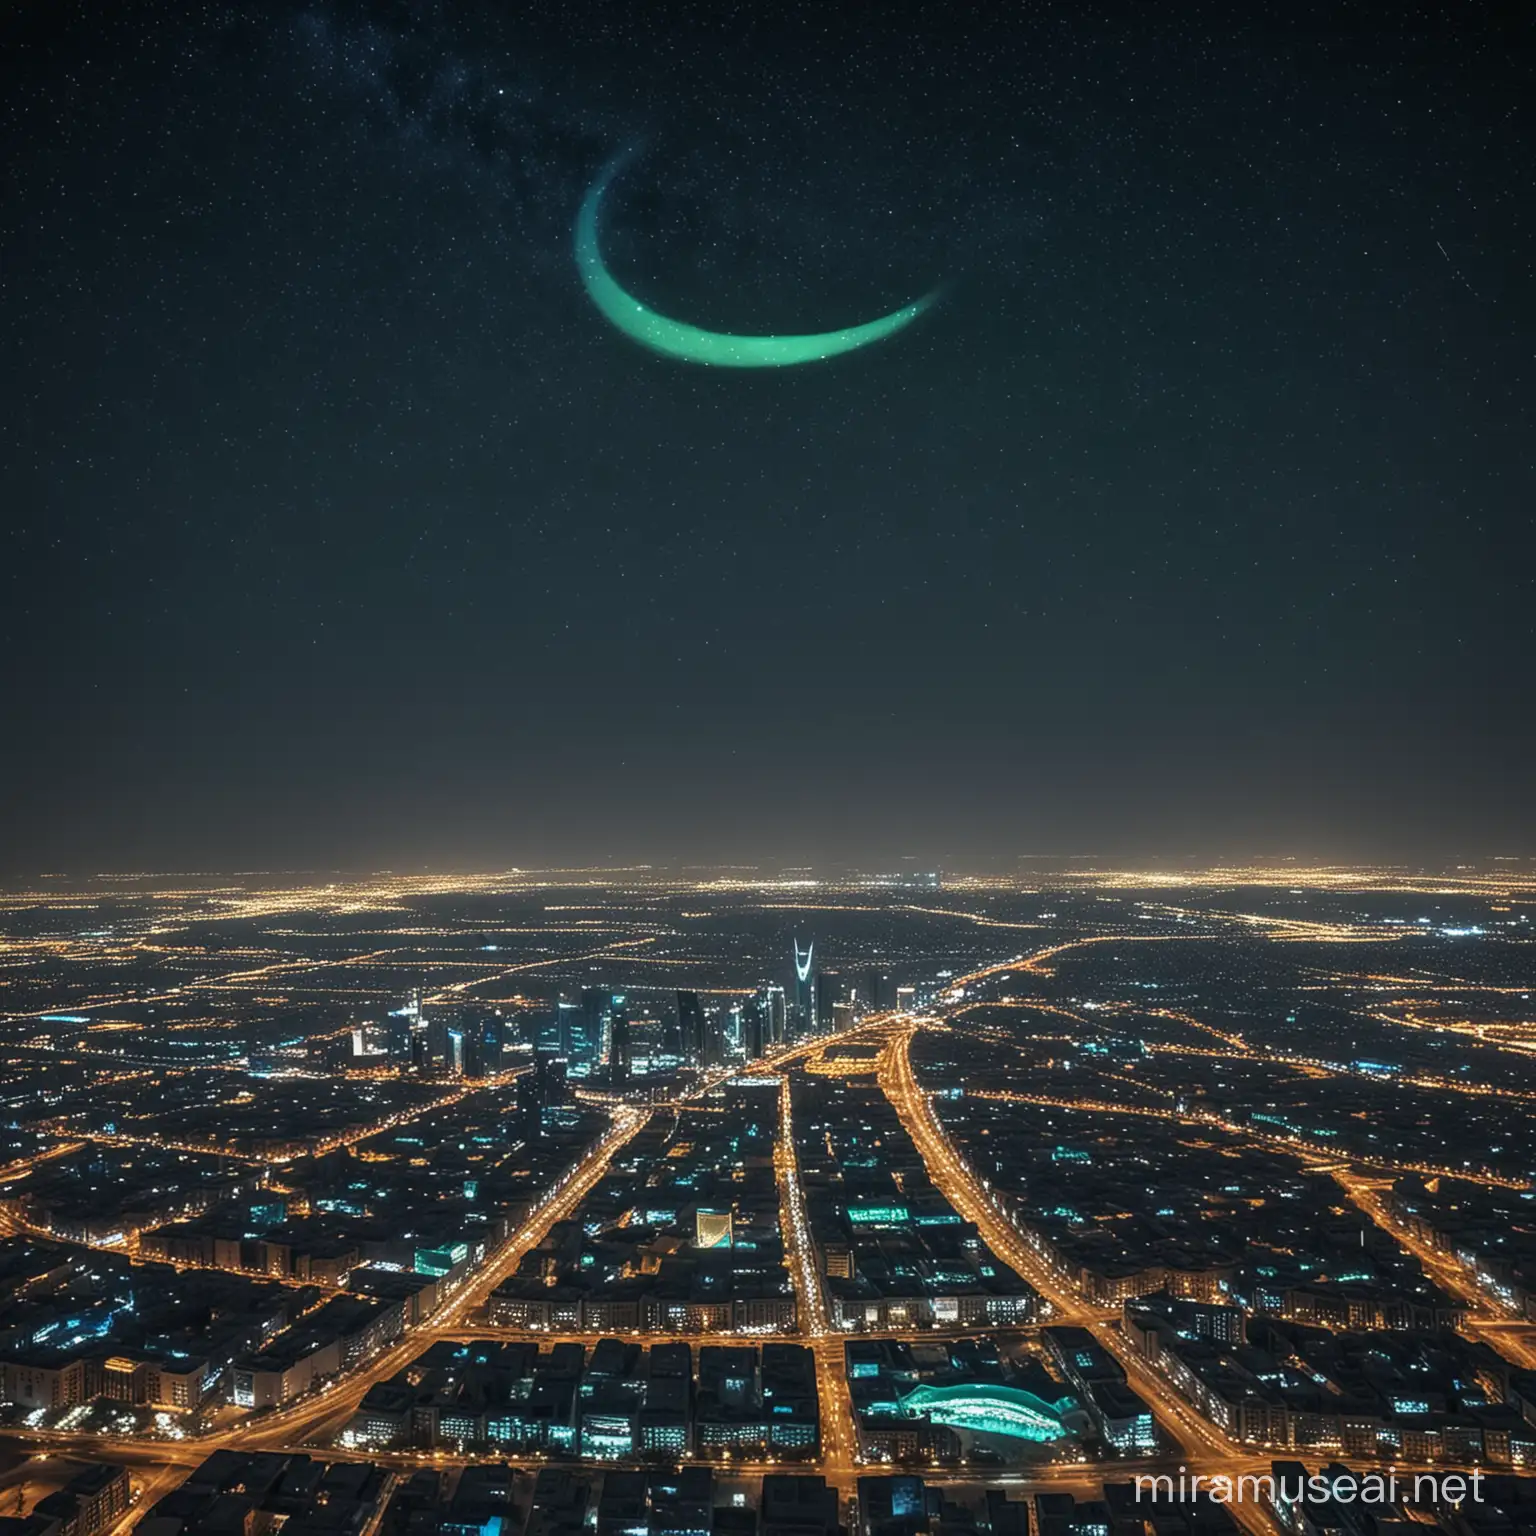 Fly over in view of the city of Riyadh with blue and green colour theme and a Crescent with the stars in the sky night